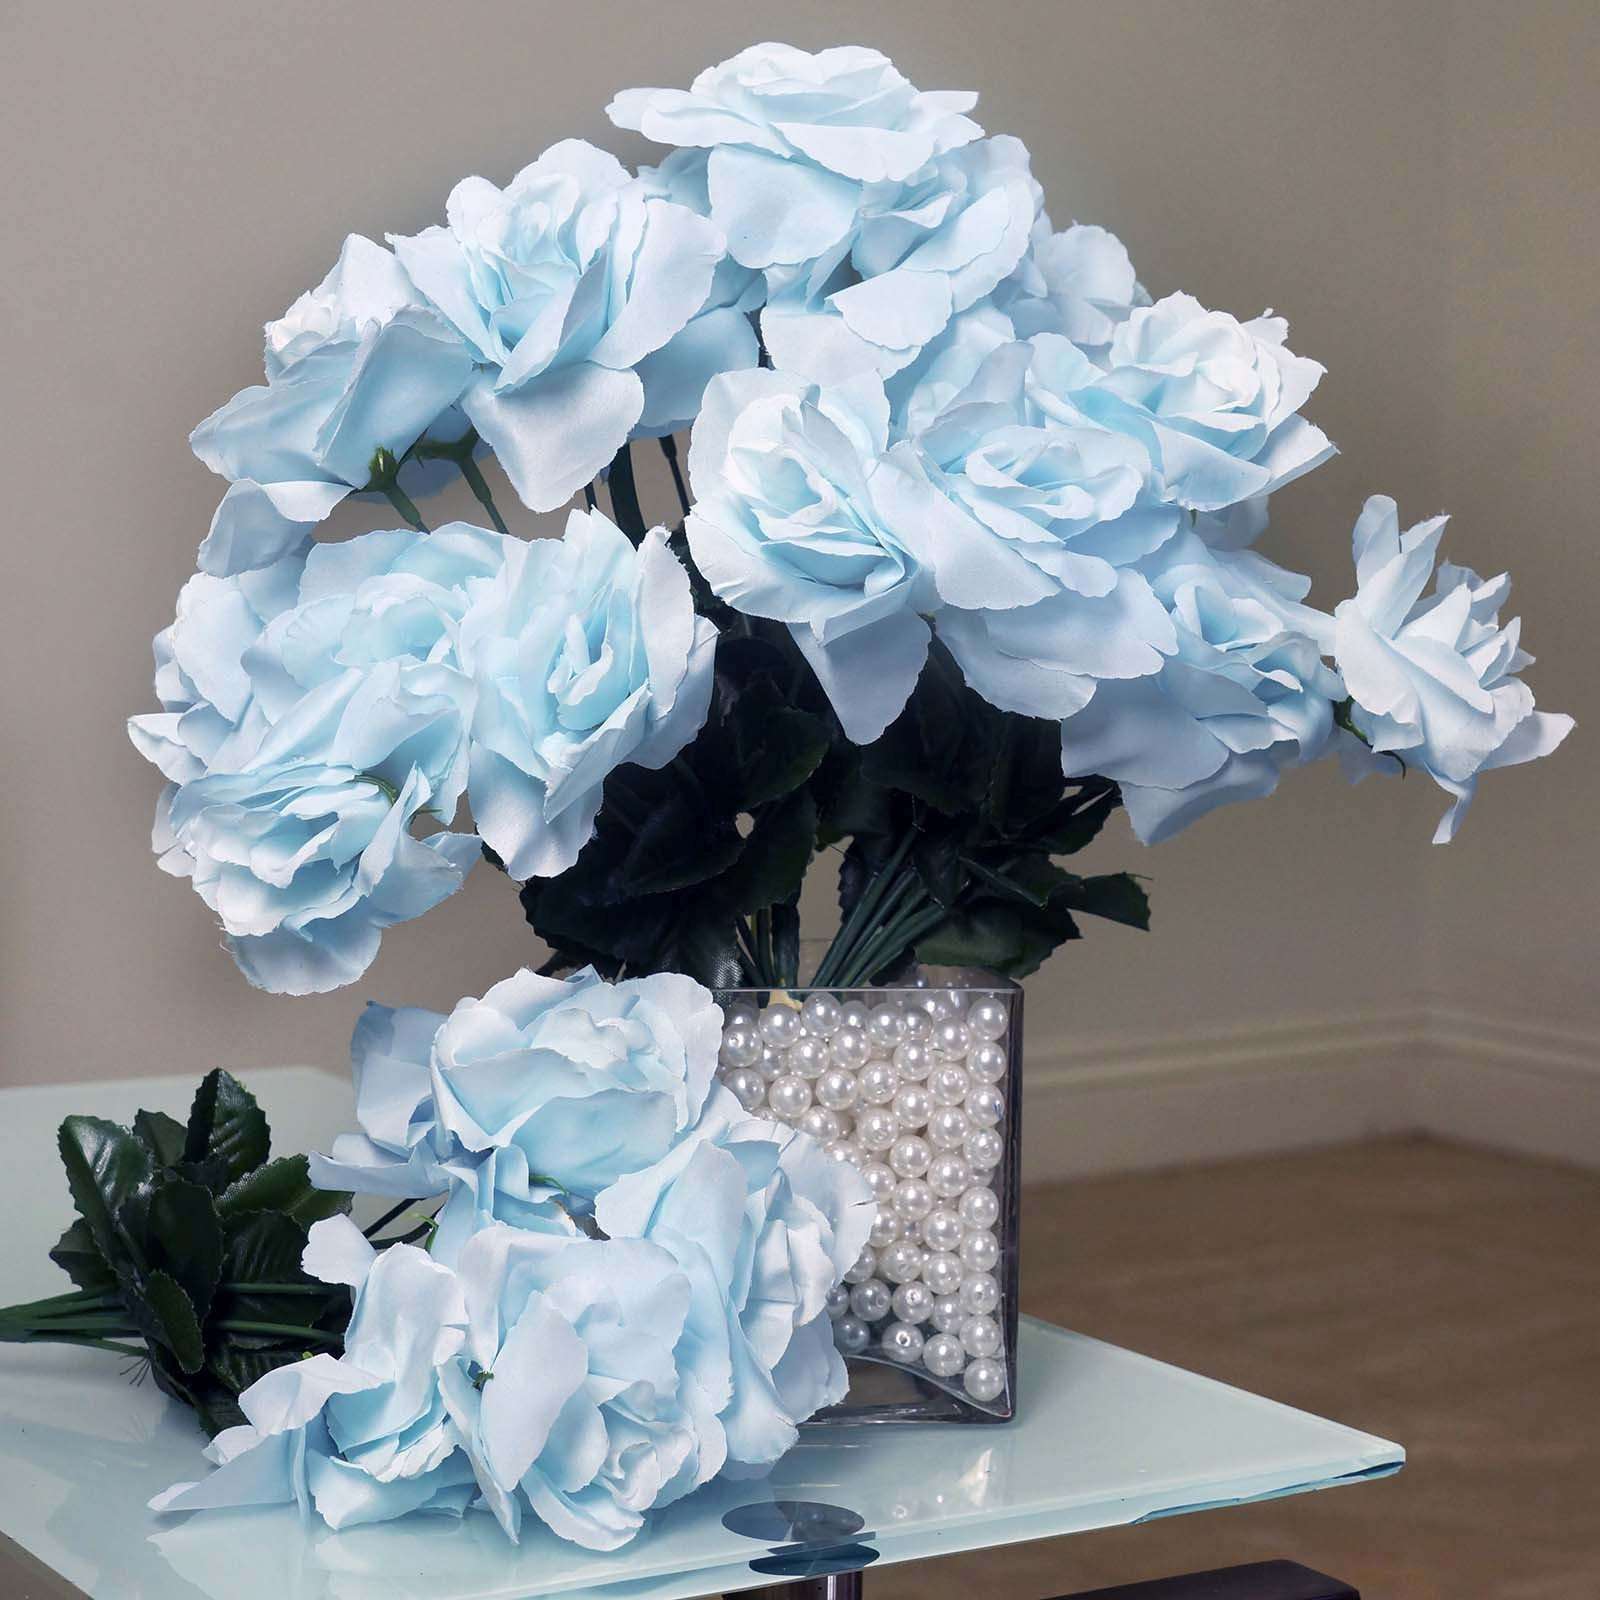 12 Bushes 84 Pcs Baby Blue Artificial Silk Rose Flowers With Green